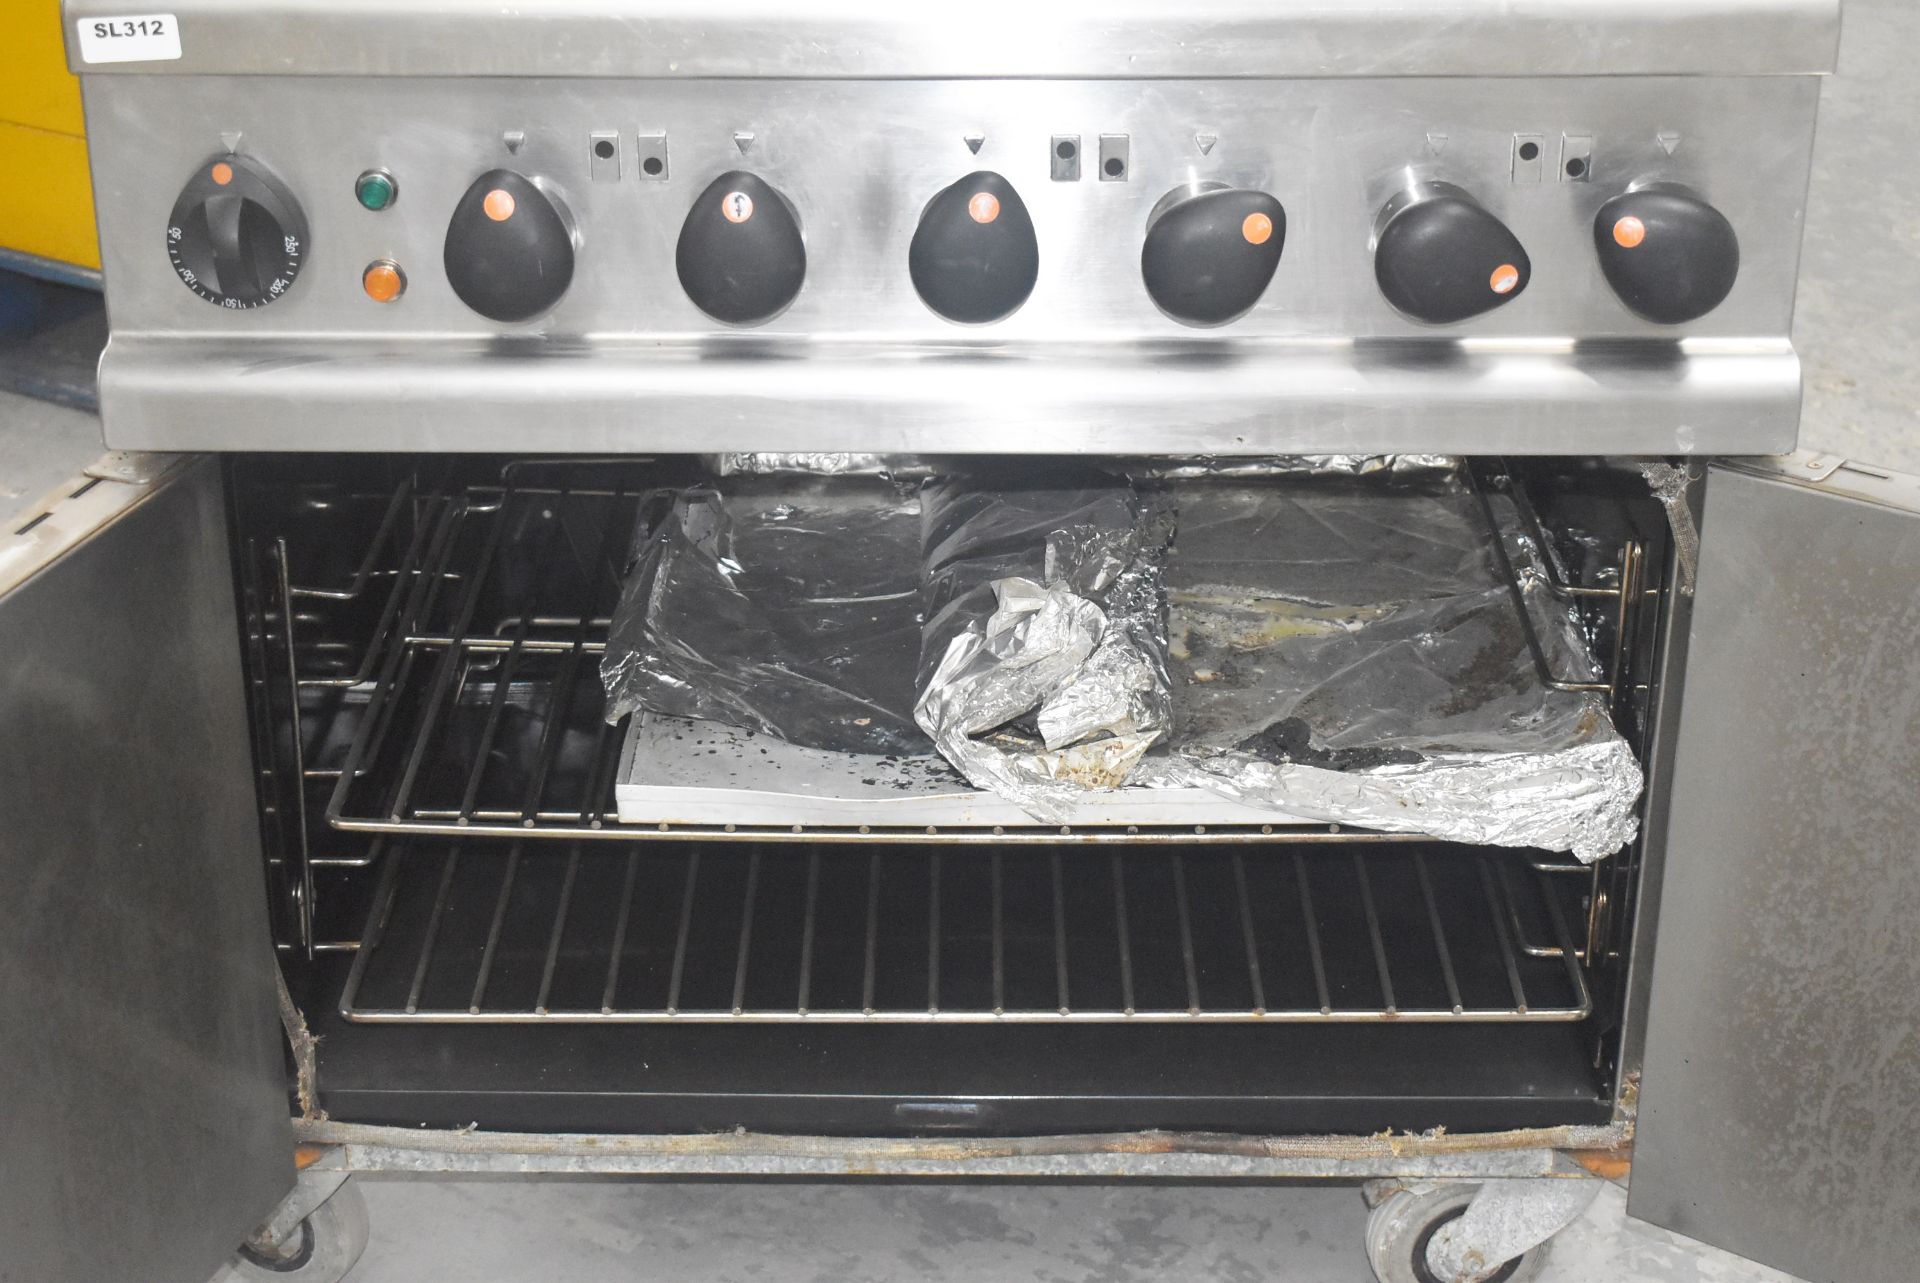 1 x Lincat Electric 6 Burner Range Cooker With Stainless Steel Exterior - Recently Removed from a - Image 9 of 9